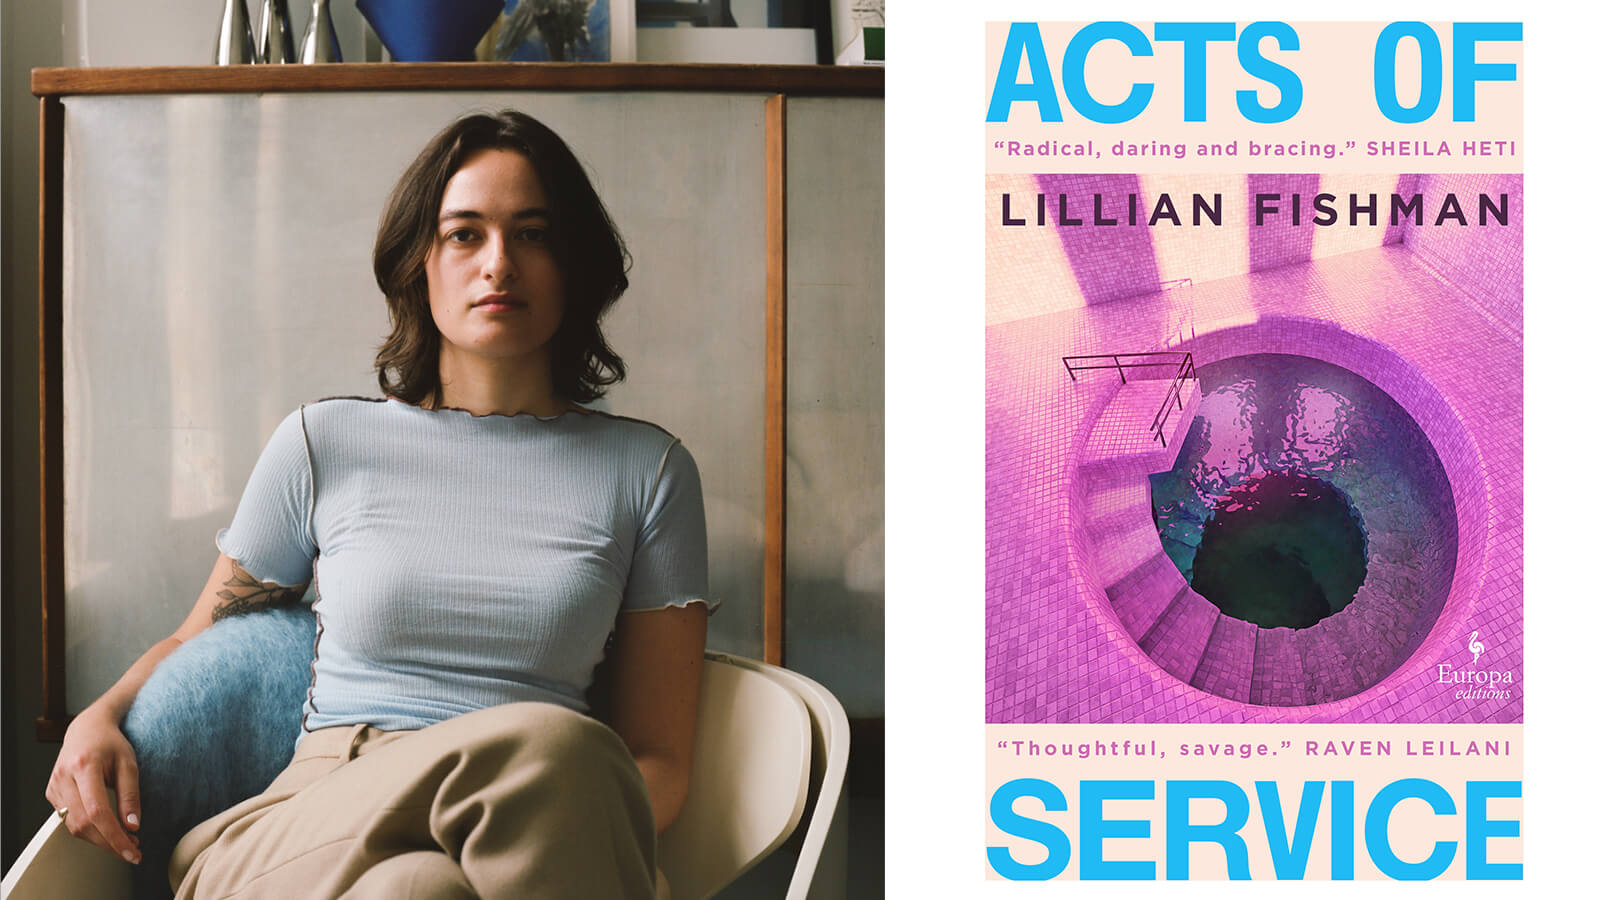 Image of author Lillian Fishman alongside her book cover Acts Of Service